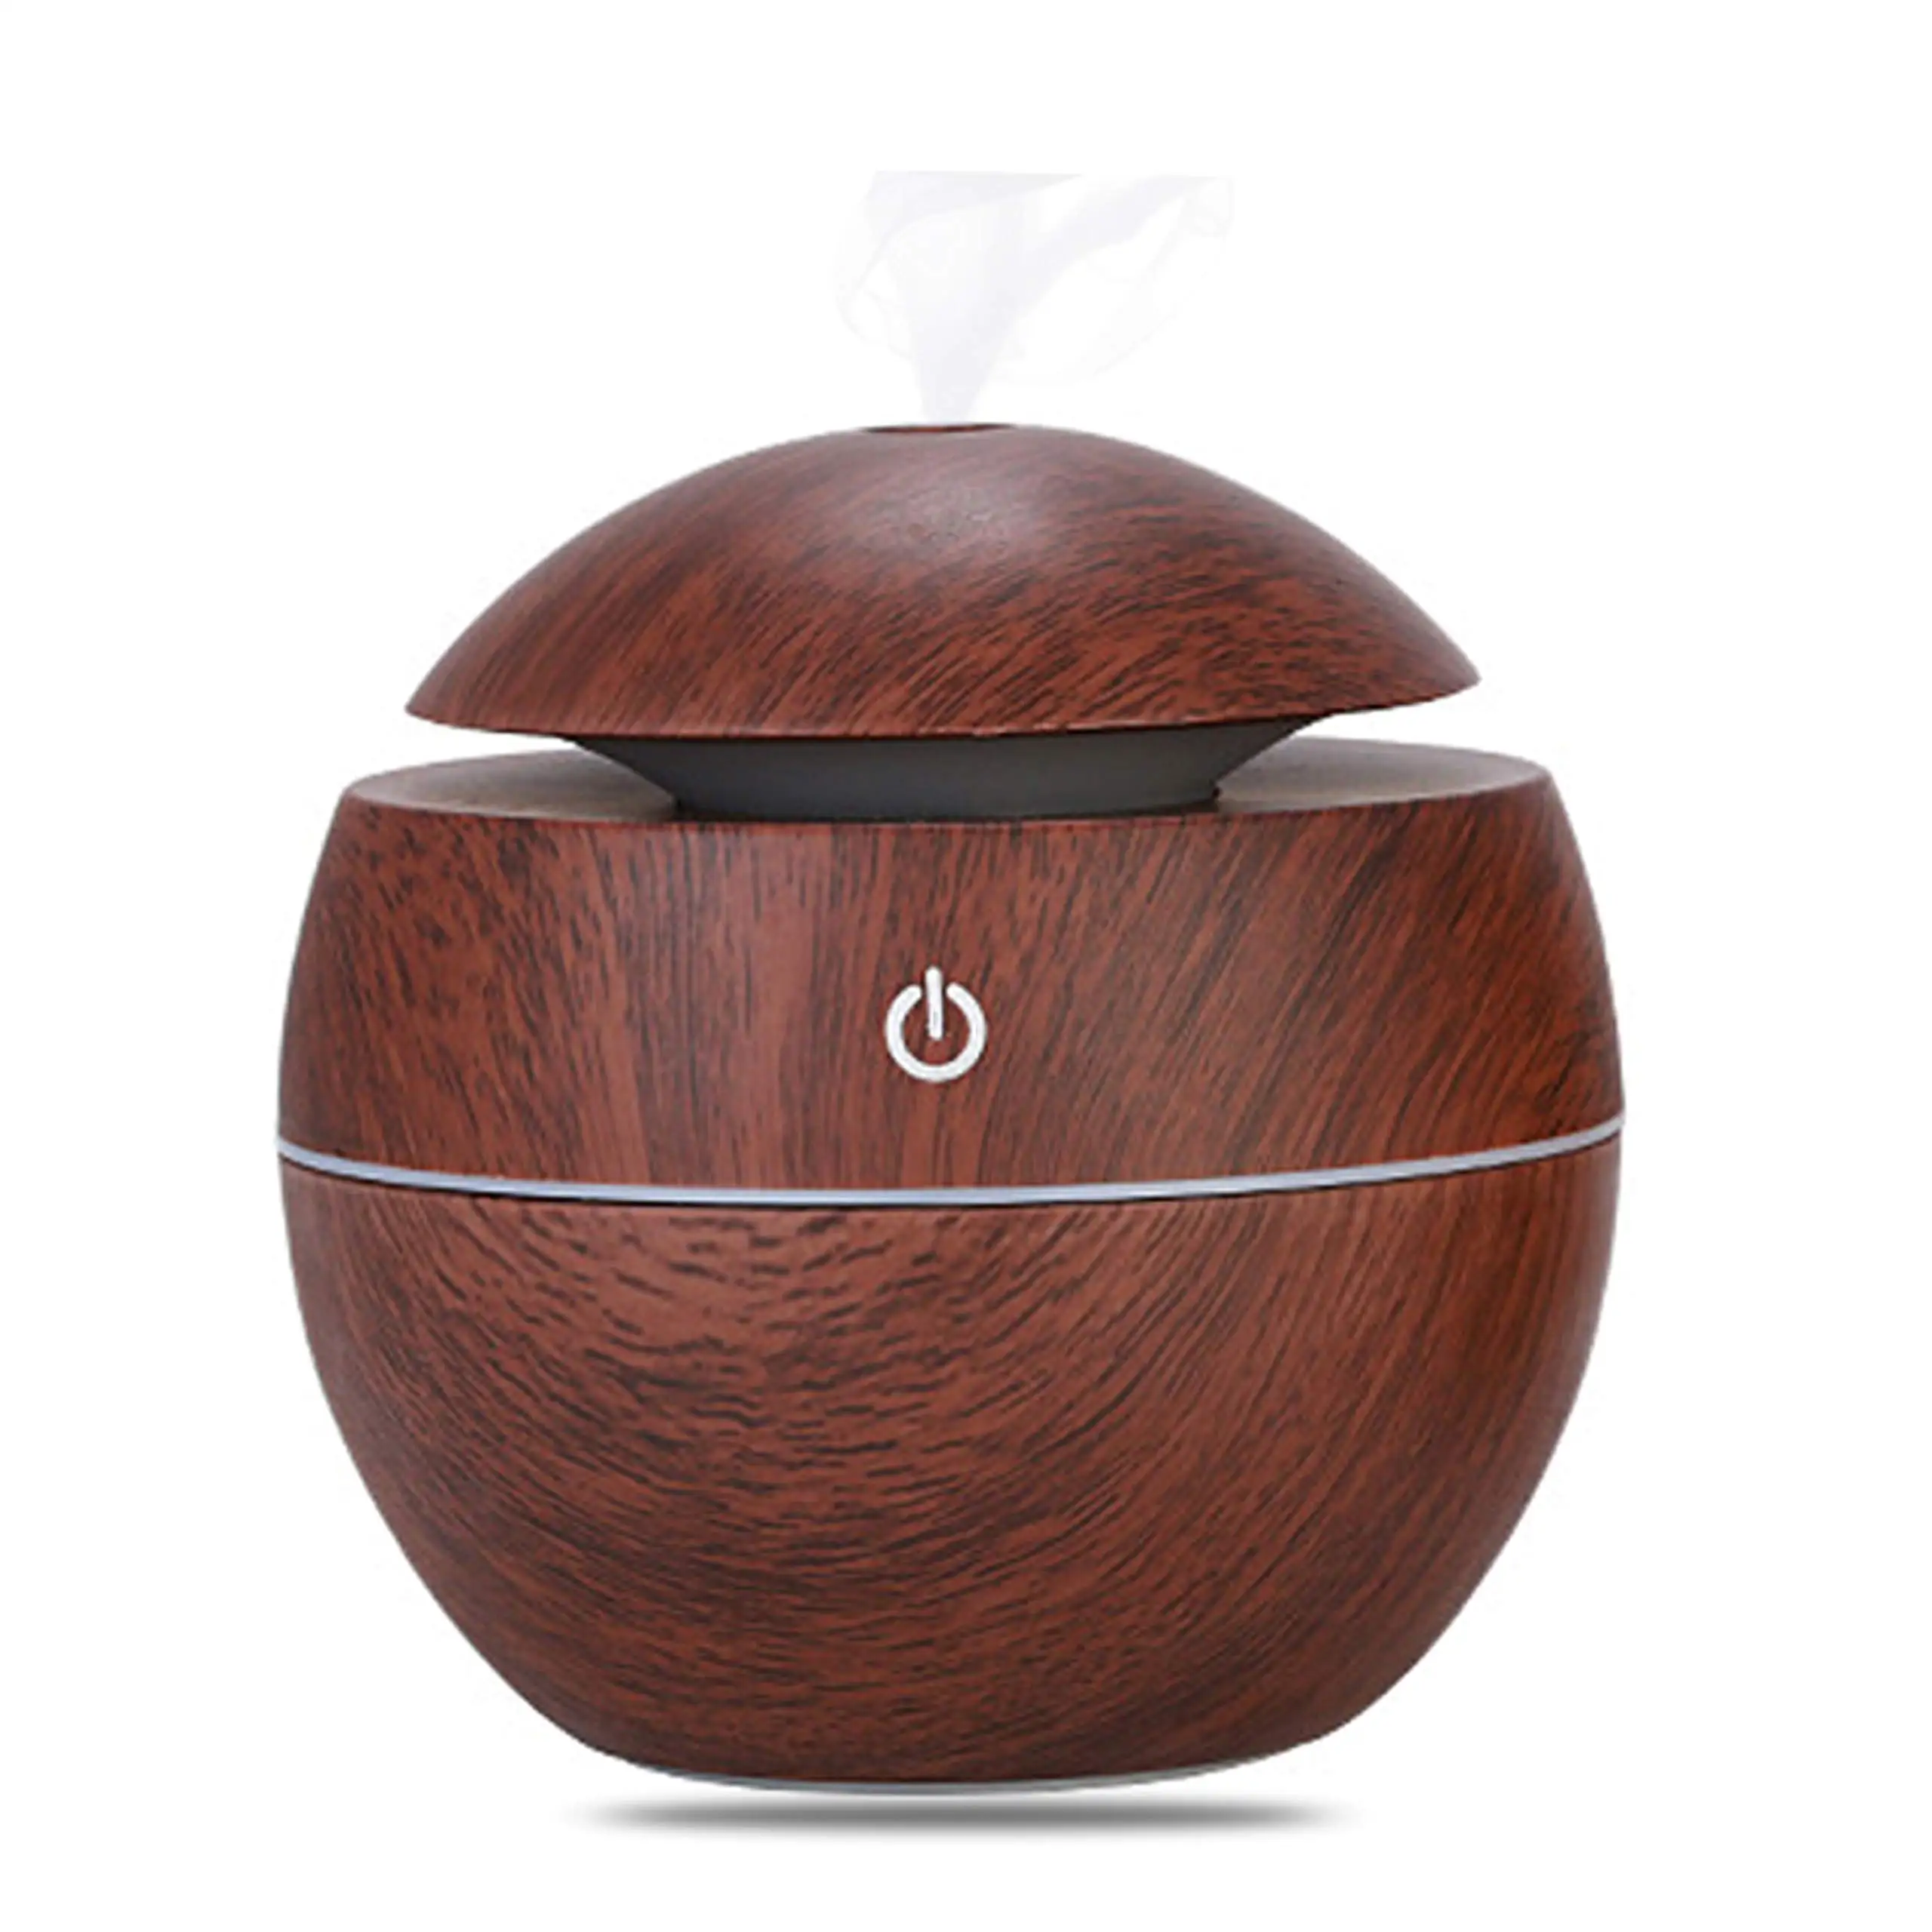 Aroma Diffuser Dark Wood for Essential Oil - Aromatherapy Diffusers - Home, Office, Yoga Room - Color Changing LED